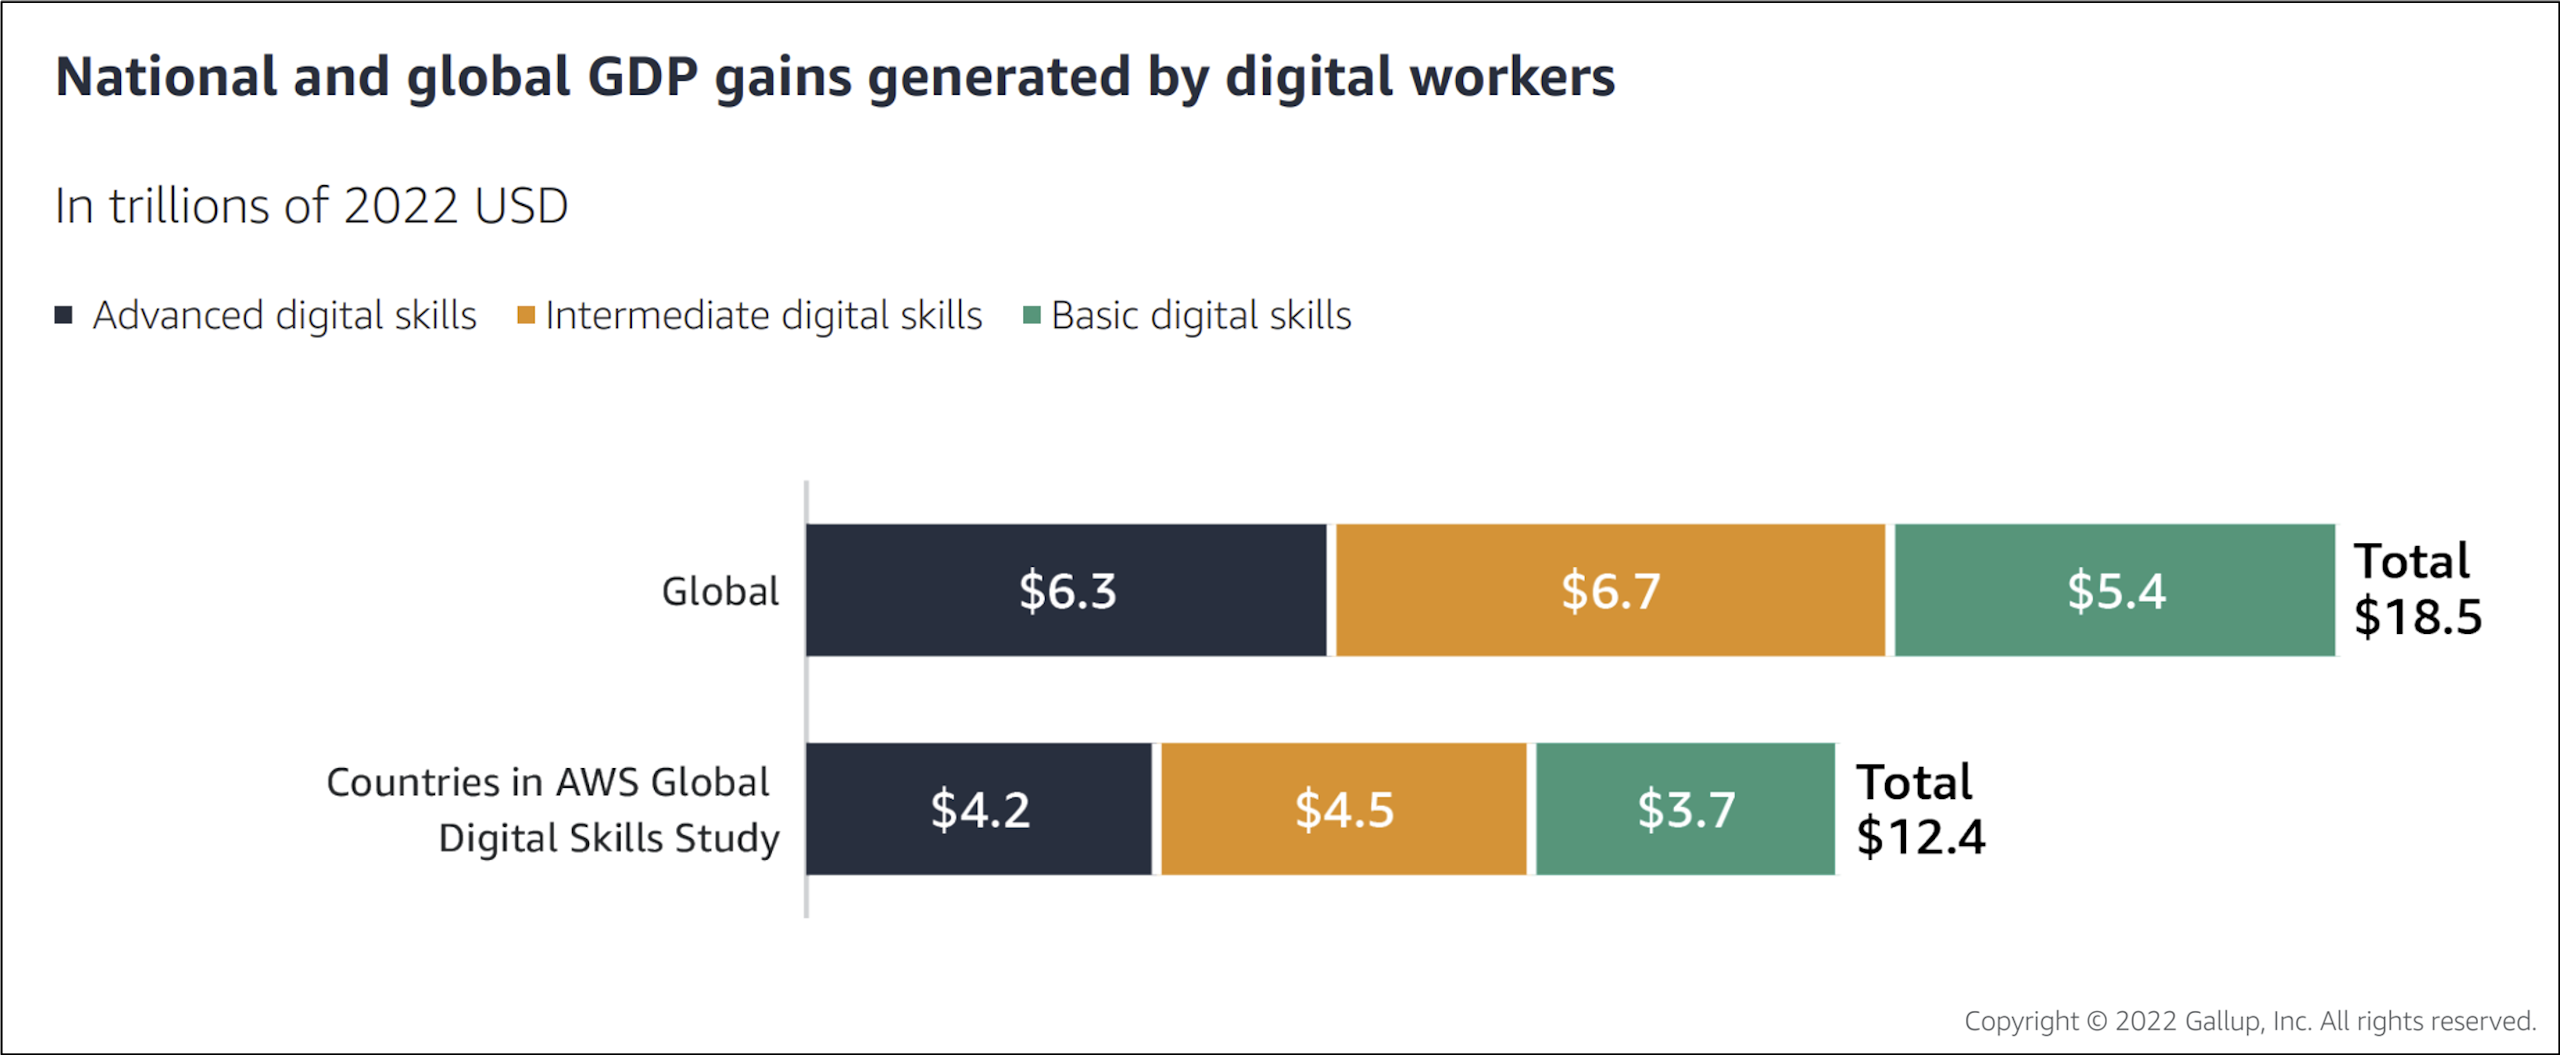 National and global GDP gains generated by digital workers